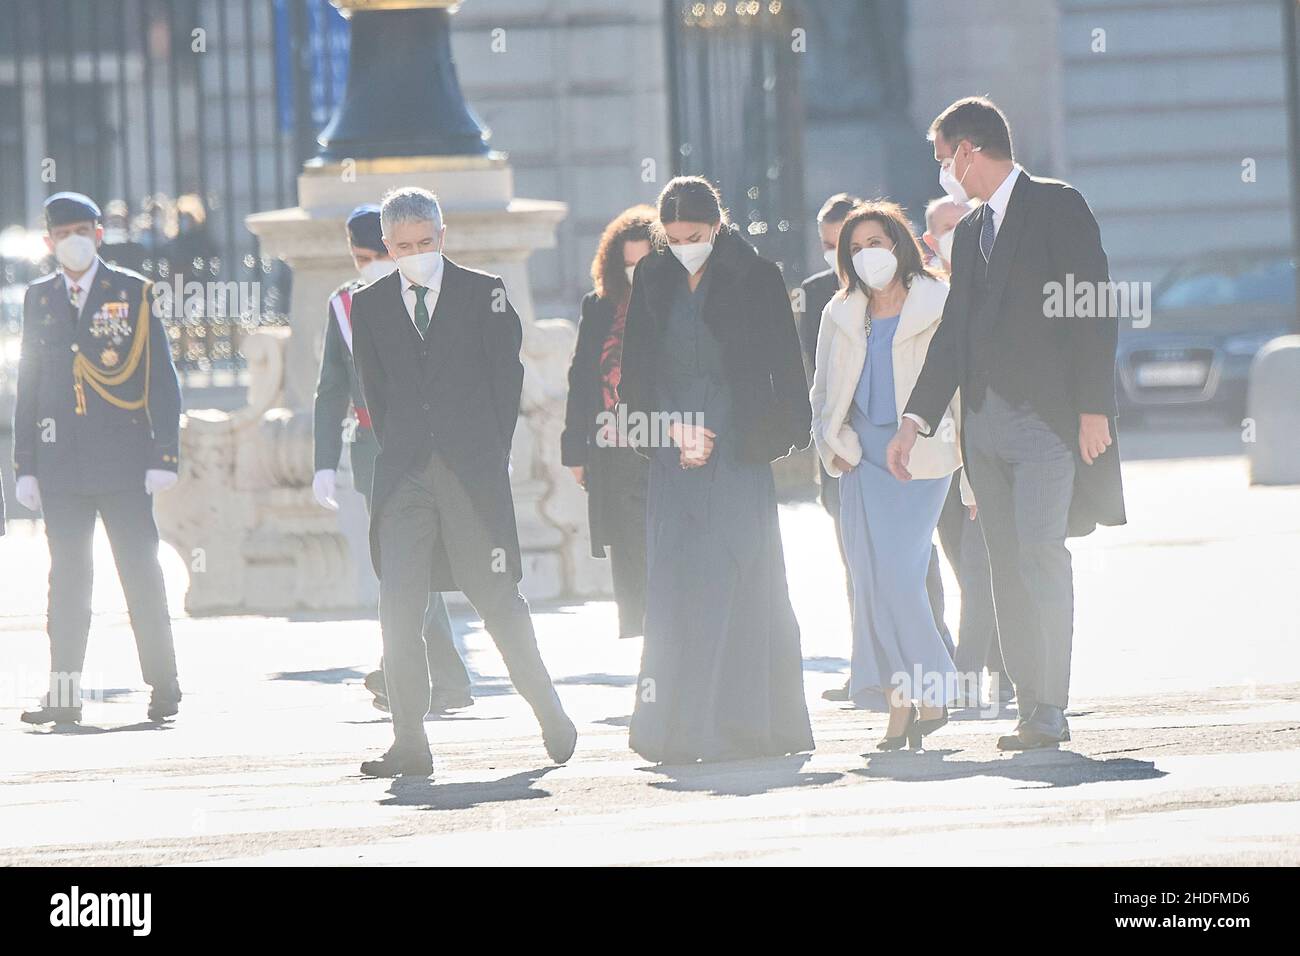 Madrid. Spain. 20220106,  Queen Letizia of Spain, Pedro Sanchez, Prime Minister, Margarita Robles, Fernando Grande Marlaska attends New Year's Military Parade 2022 at Royal Palace on January 6, 2022 in Madrid, Spain Credit: MPG/Alamy Live News Stock Photo